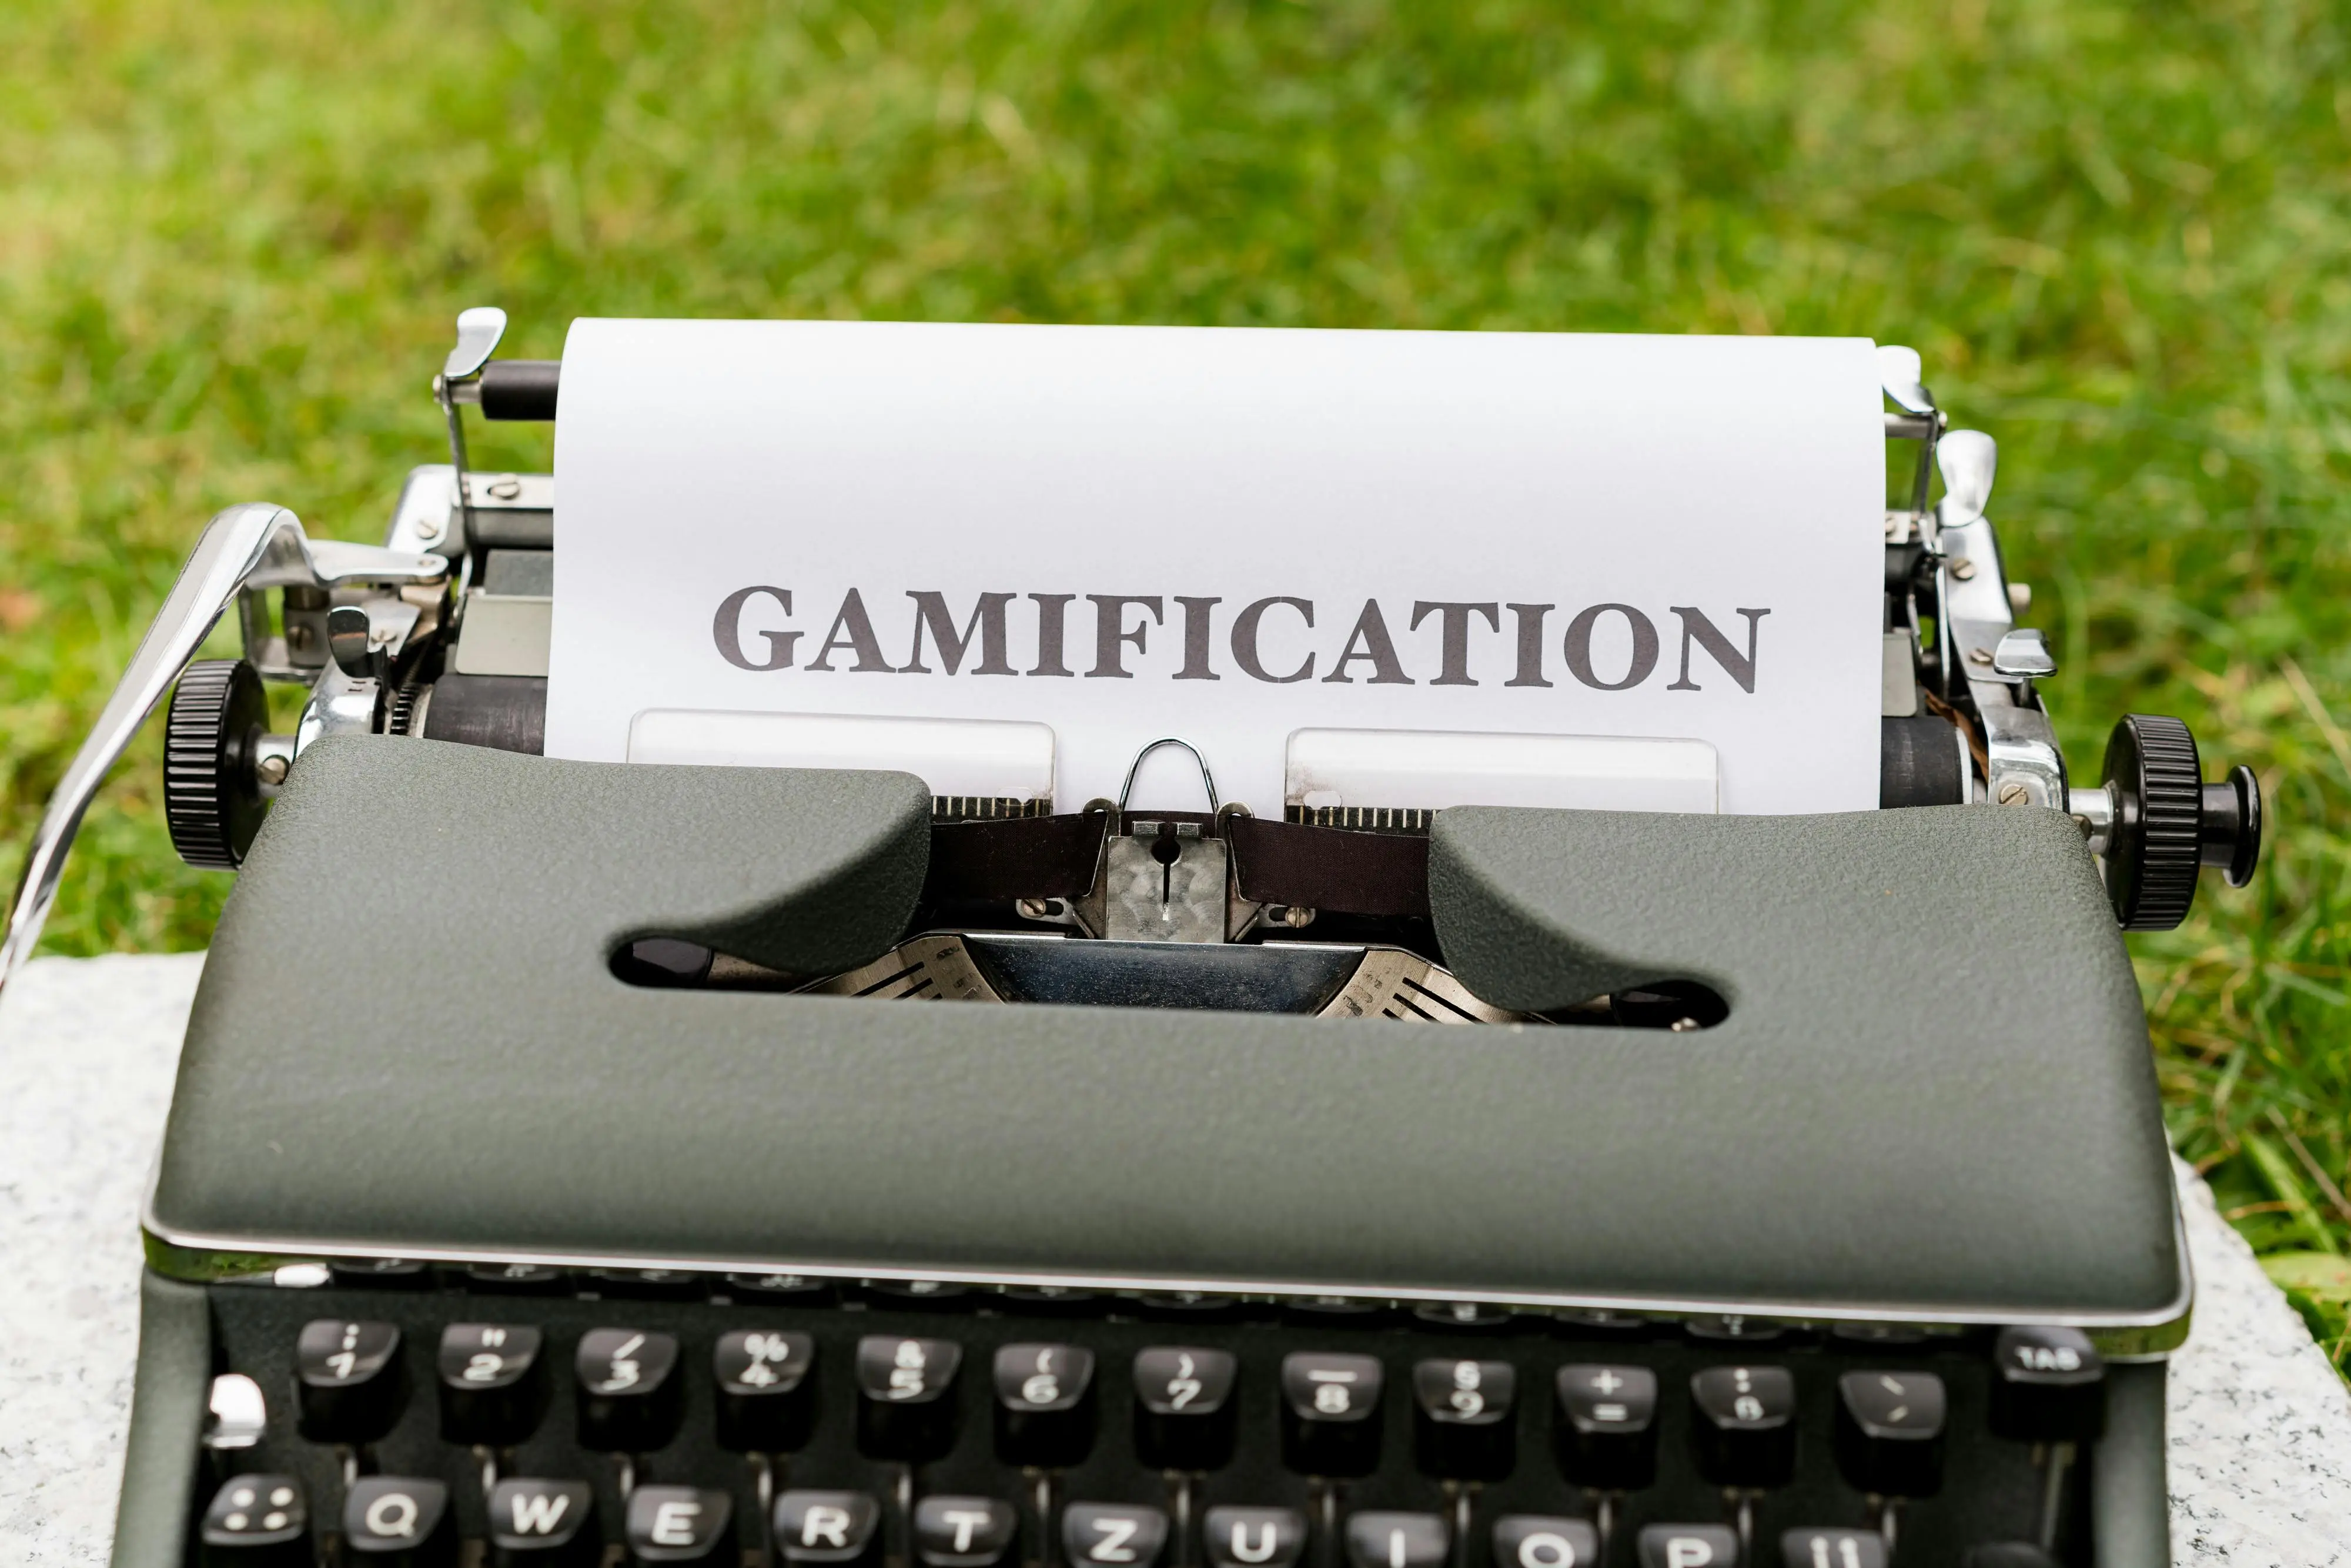 Amazon discount website gamification-in-education-2024-1.webp image